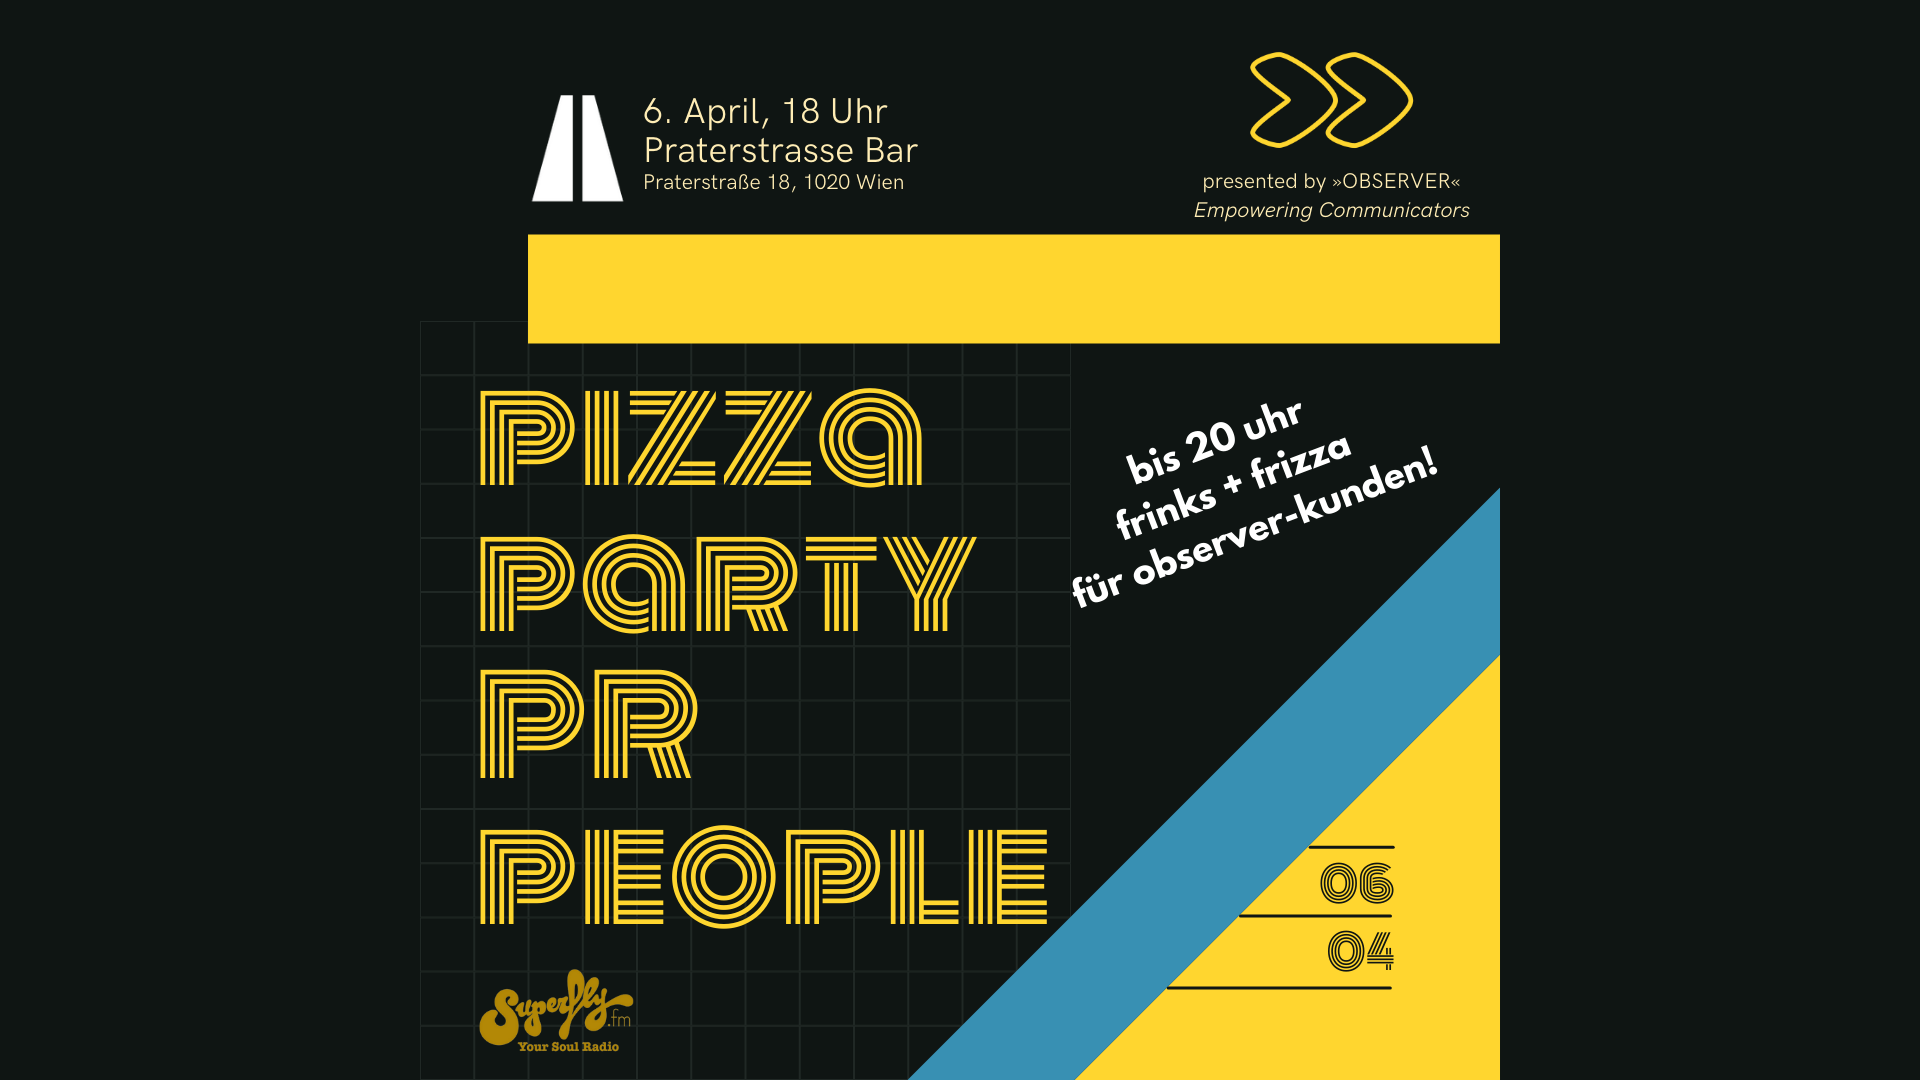 OBSERVER Eventreihe "Pizza, Party, PR, People"